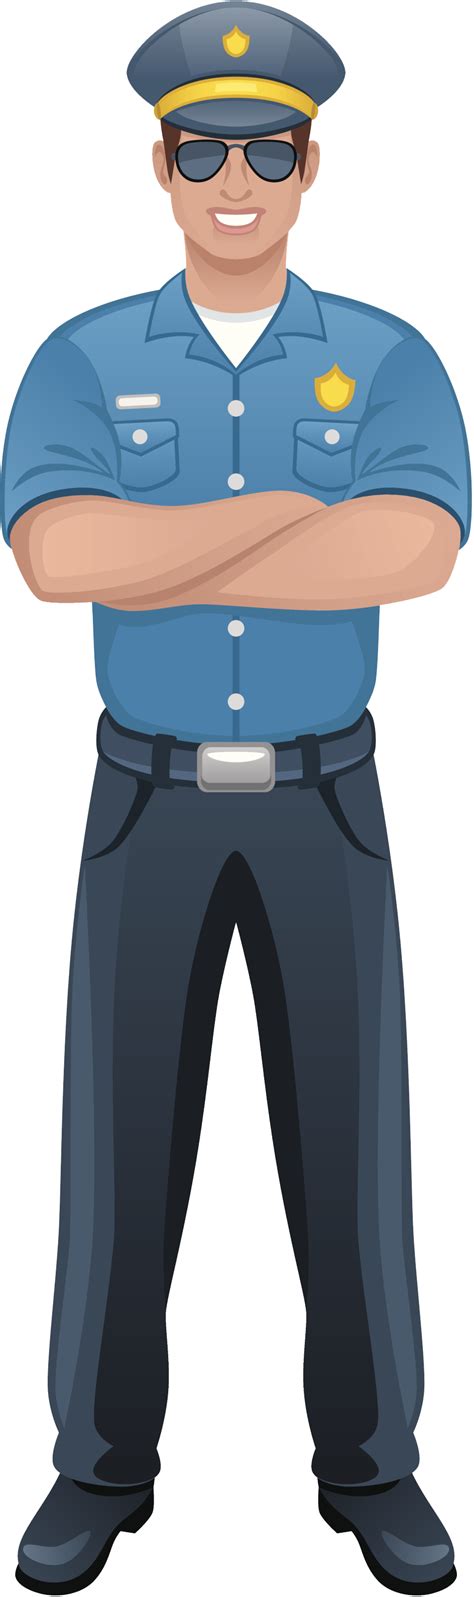 Animated Free Police Clipart